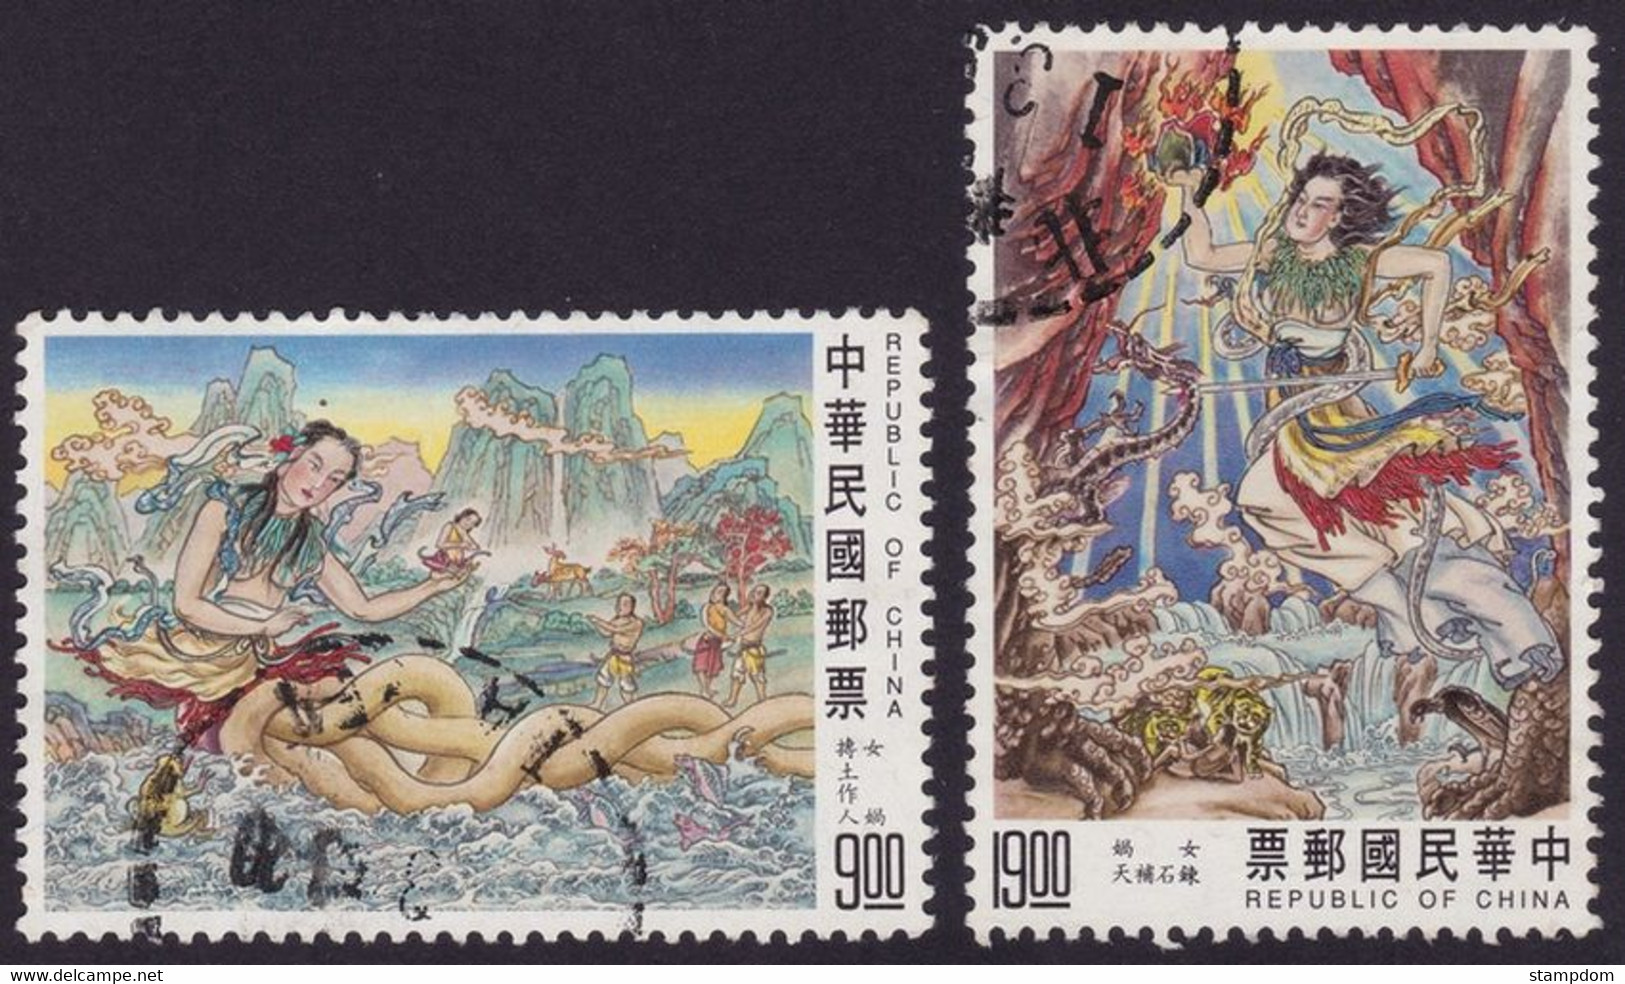 ROC TAIWAN 1993 Creation NT$5.00, NT$19.00 Sc#2883-2884 - USED @E3293 - Used Stamps